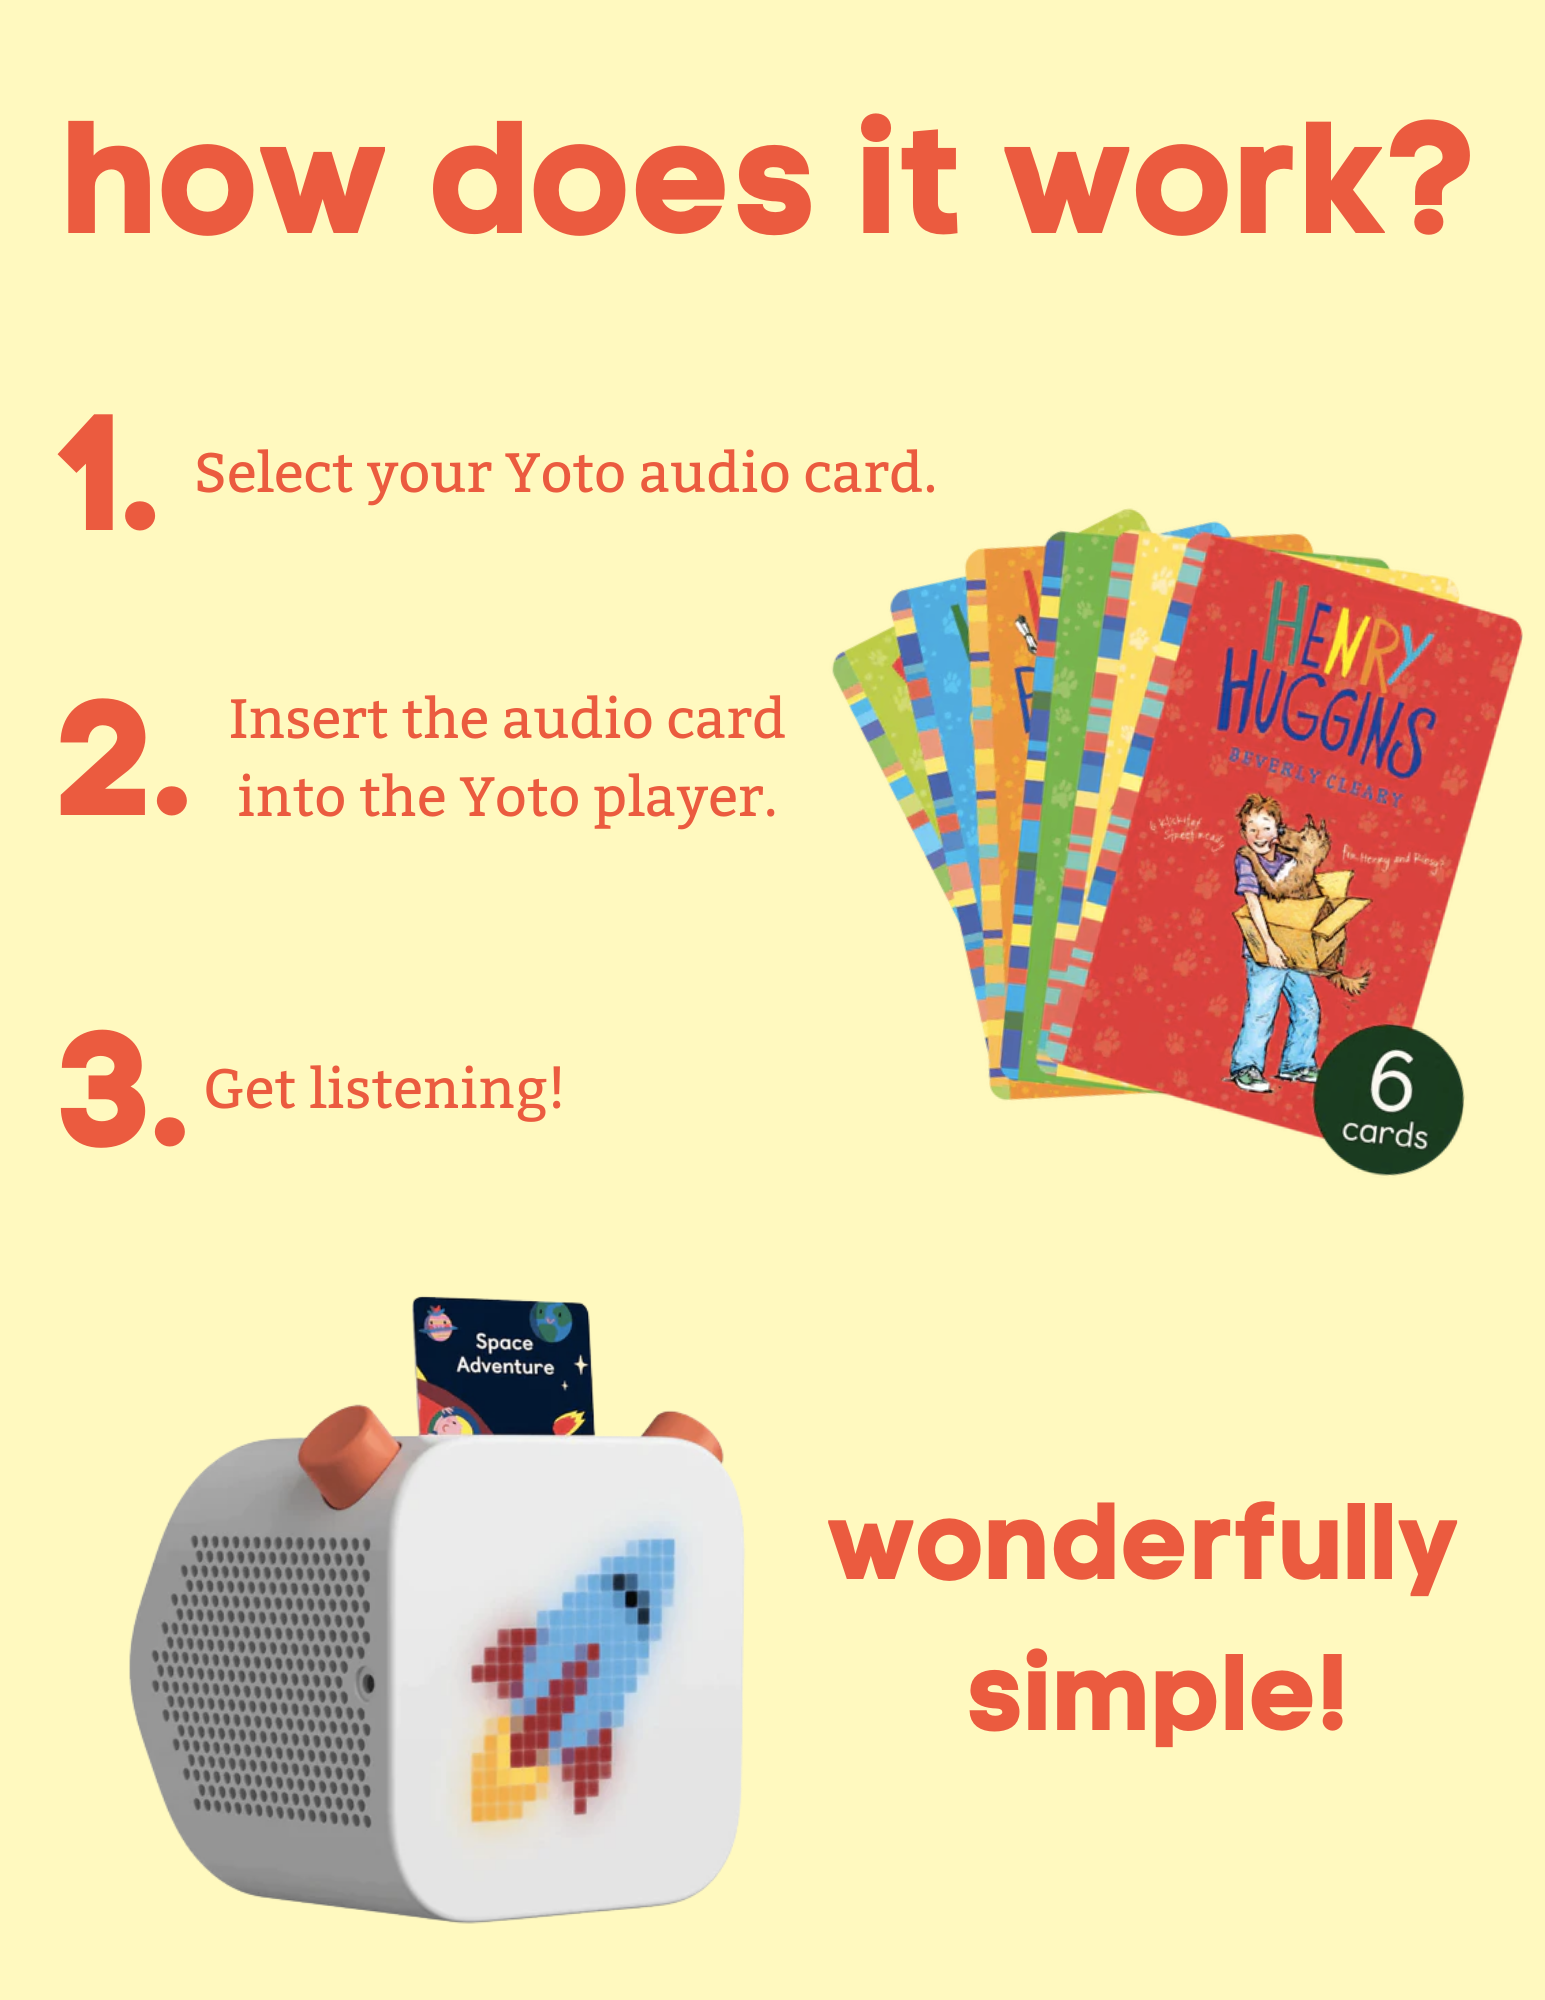 "How Does it Work?" Select your audio card, insert it into the Yoto plyaer, and get listening! A picture of Yoto audio cards and a Yoto box are on the page. 